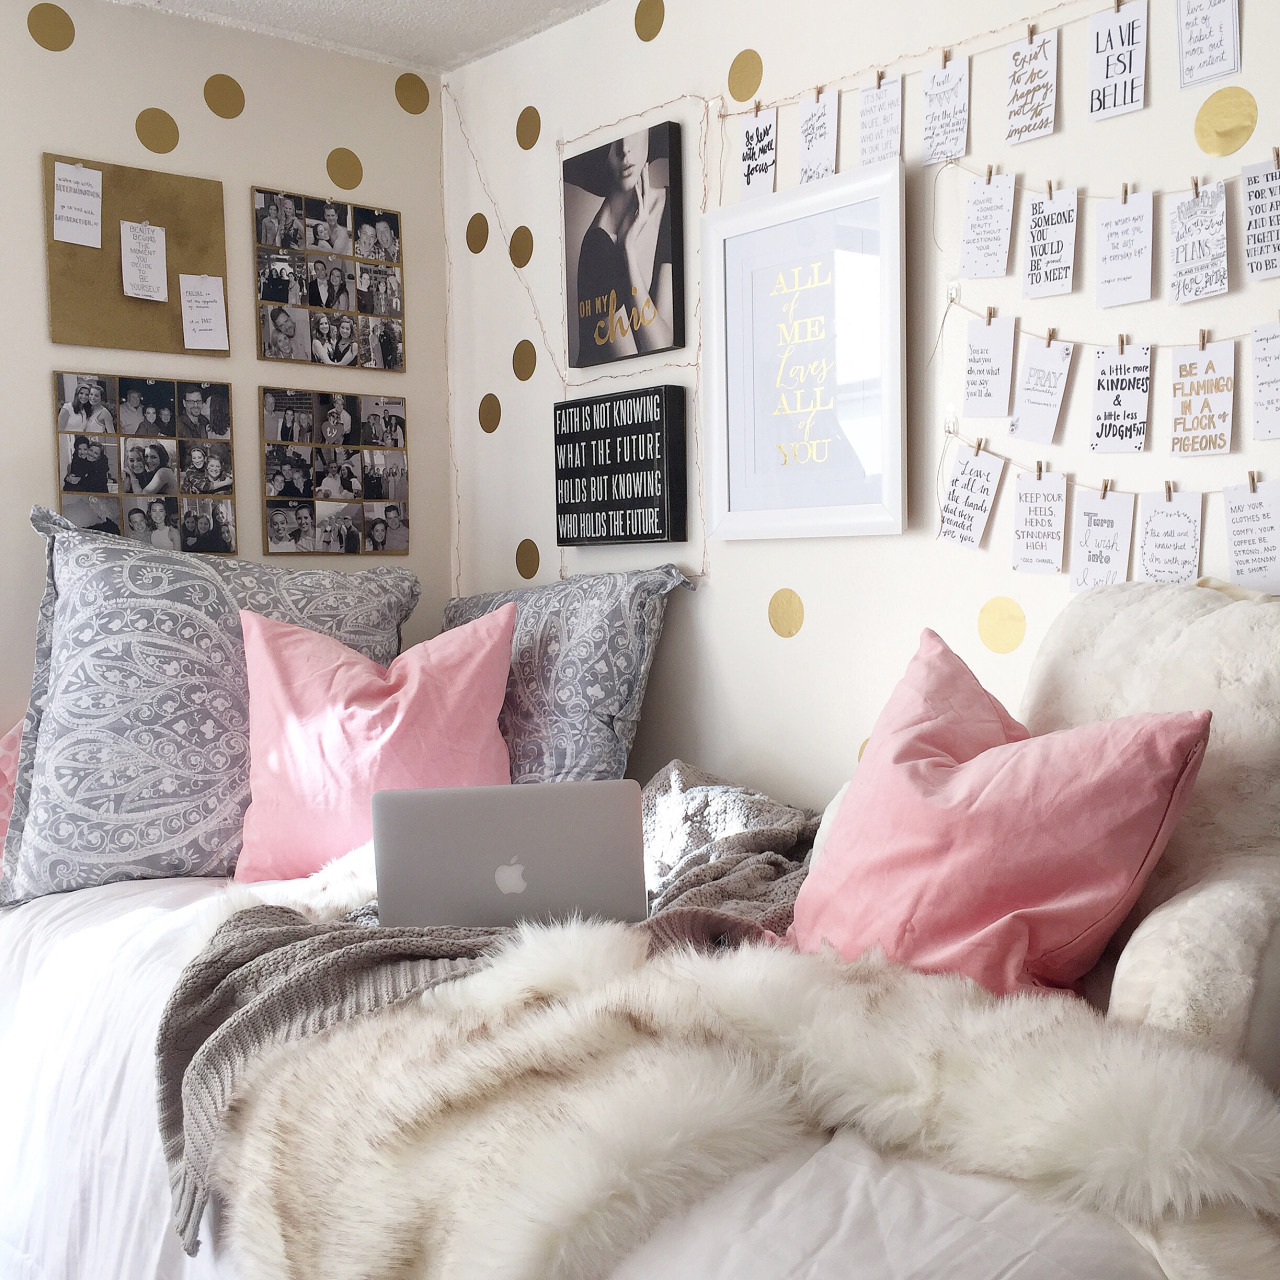 Inspiration from 20 Super Stylish Real Dorm Rooms   Apartment Therapy